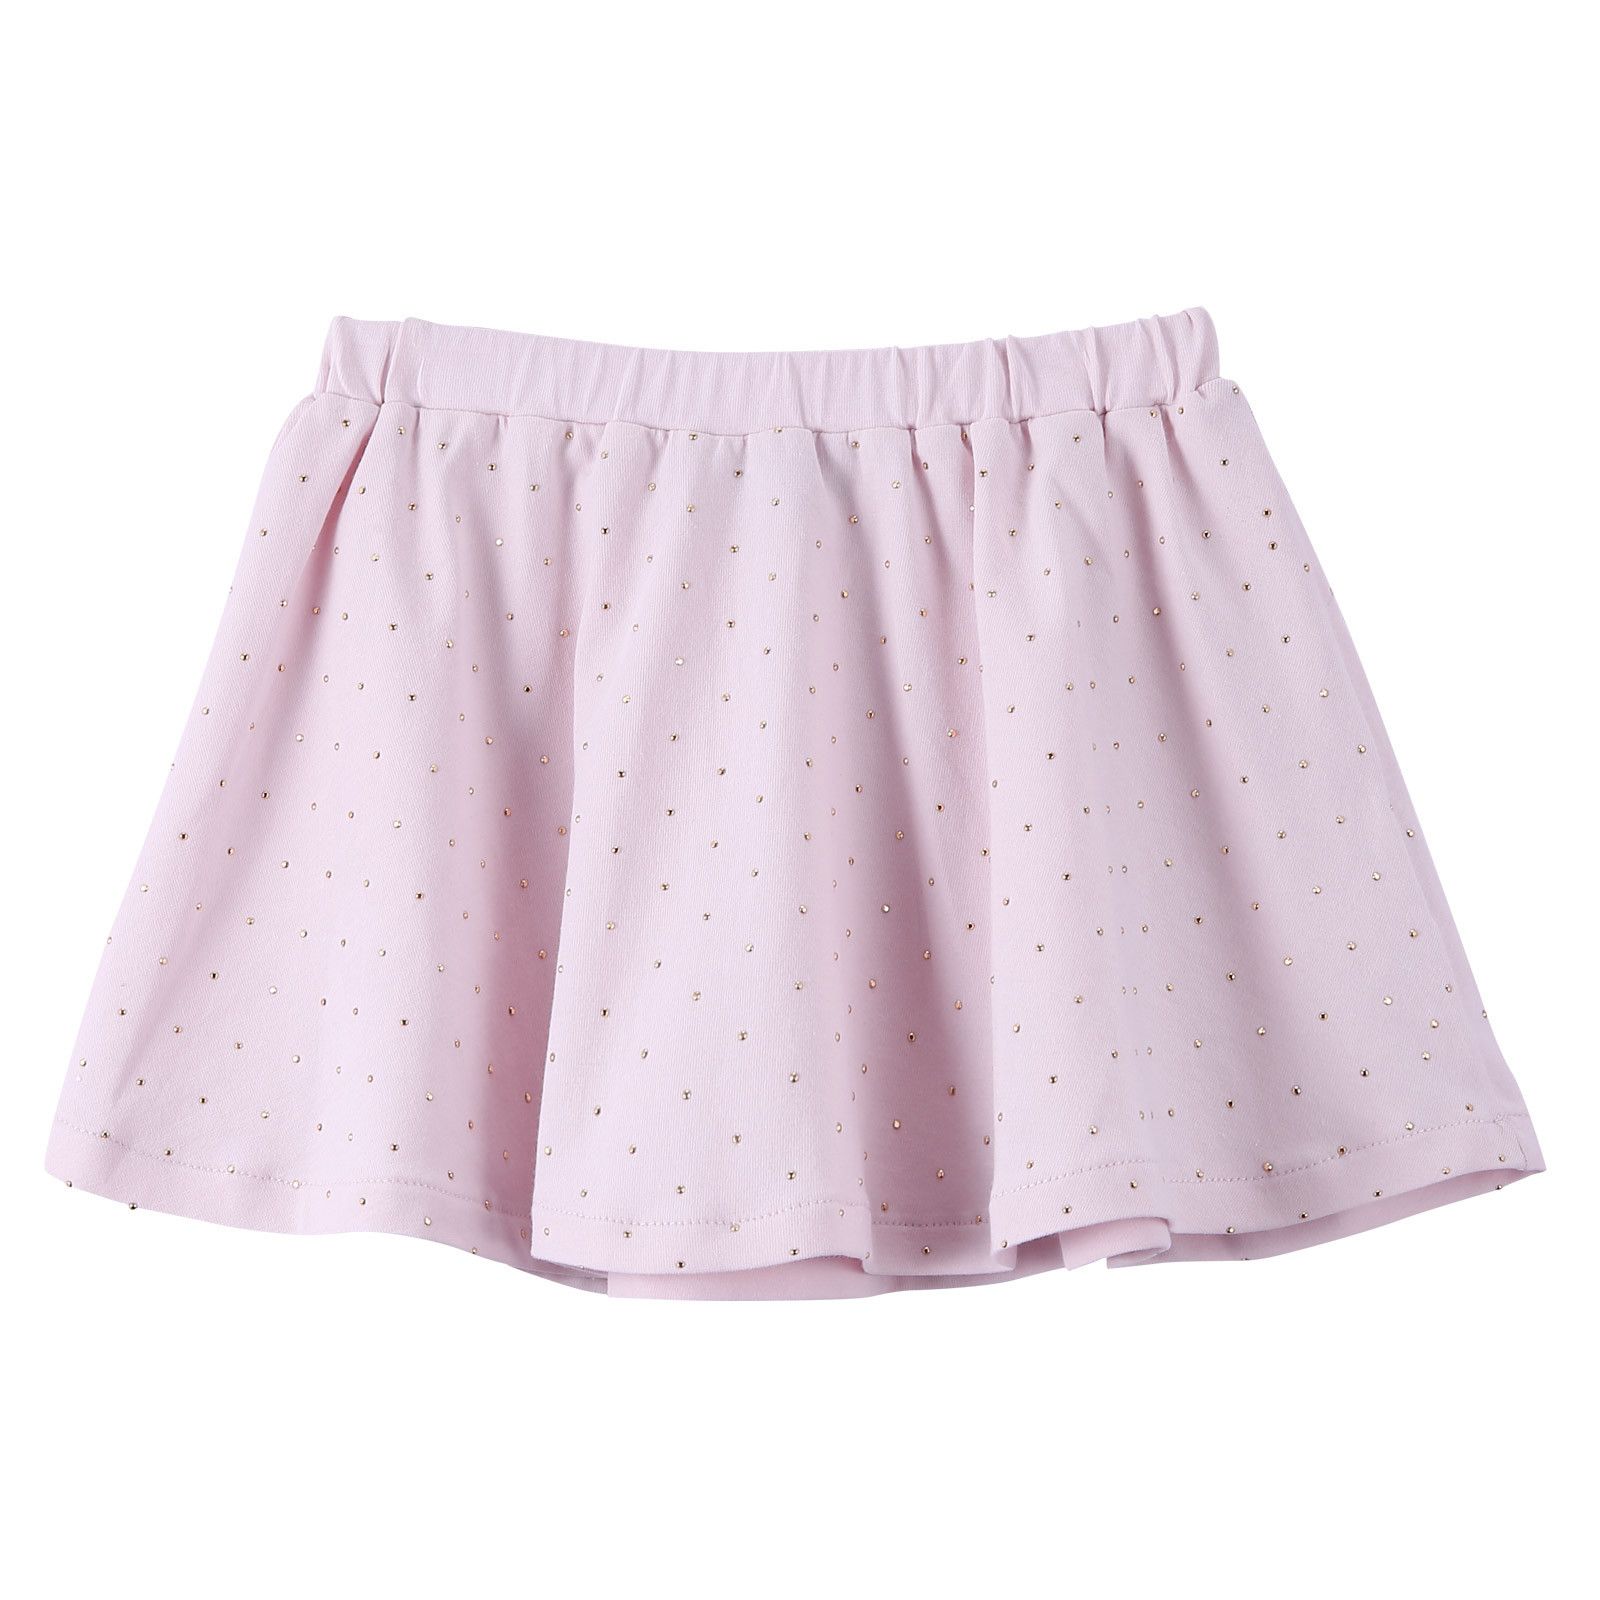 Baby Girls Pink Cotton Skirt With Gold Spot Trims - CÉMAROSE | Children's Fashion Store - 2